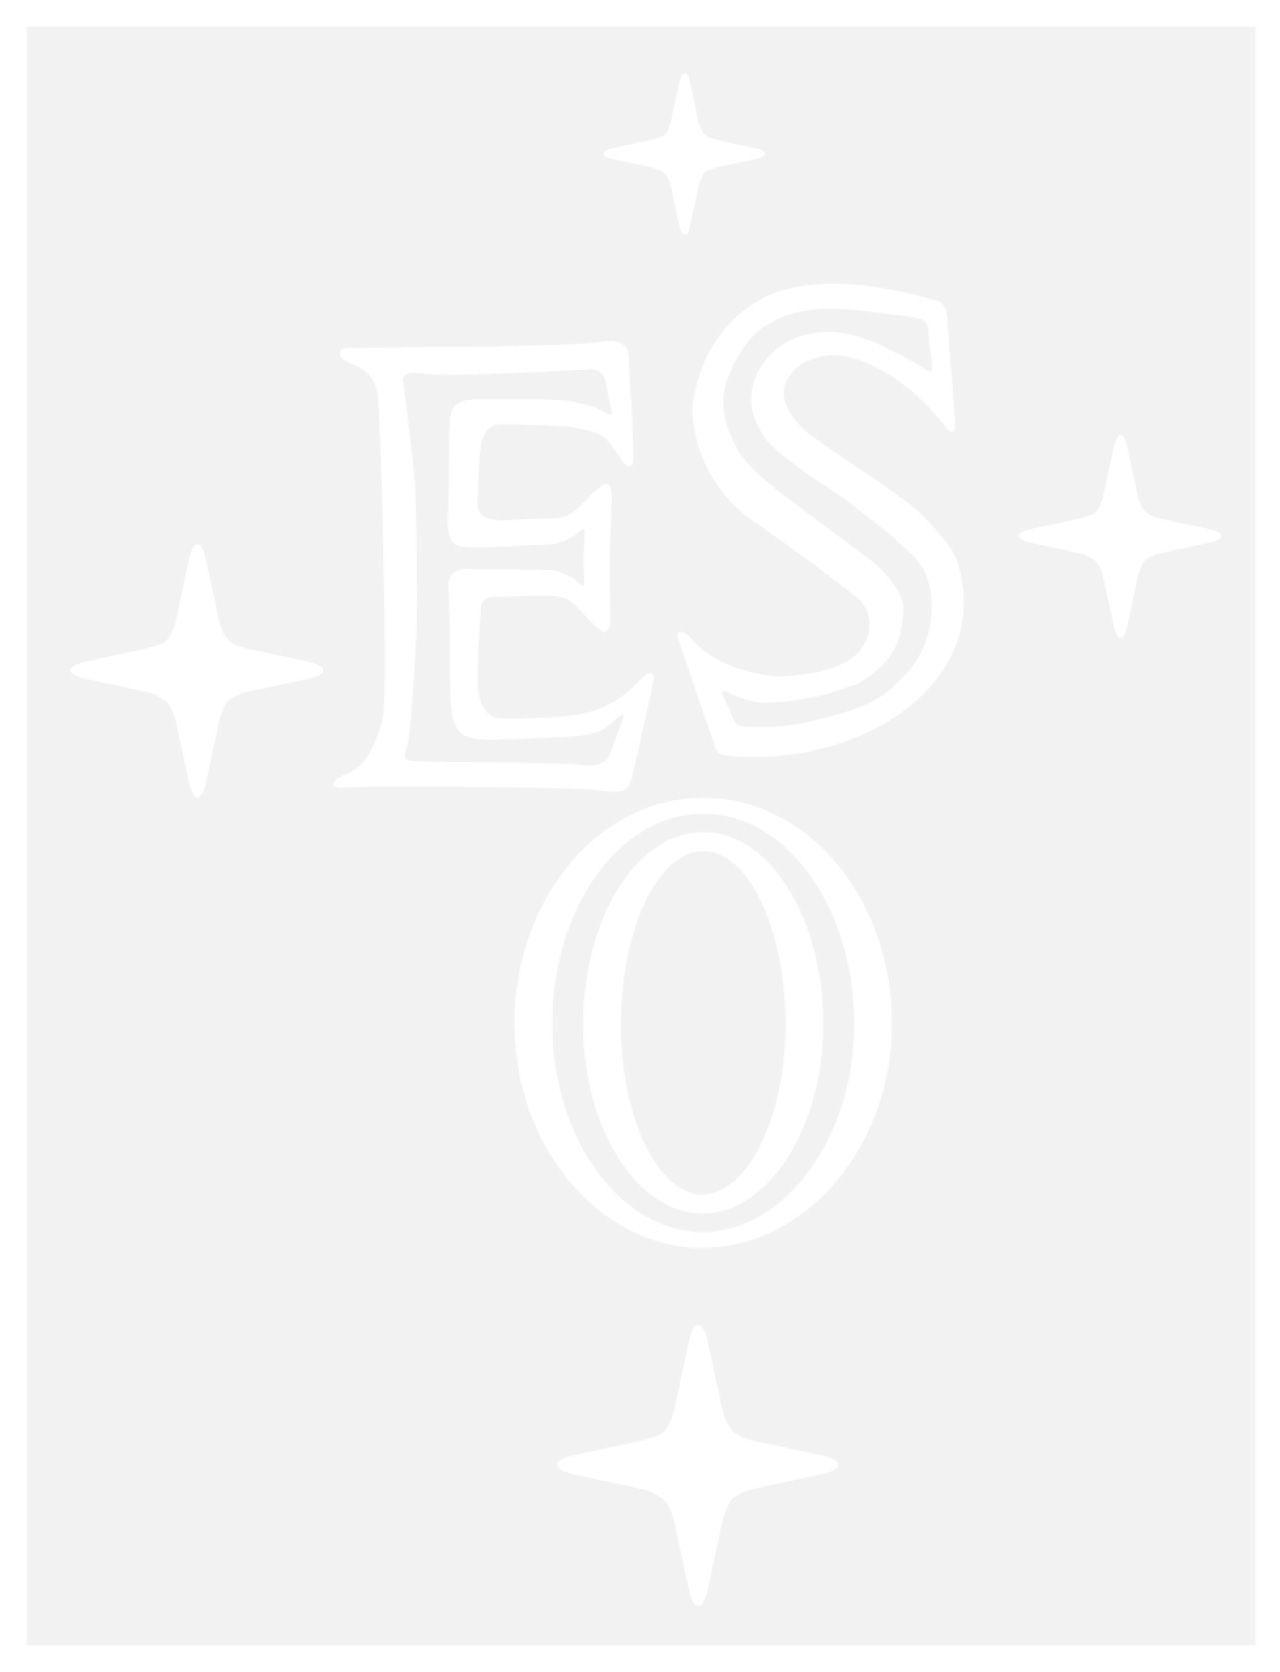 Cool Black and White Outline Logo - ESO logo outline white, with transparent background | ESO